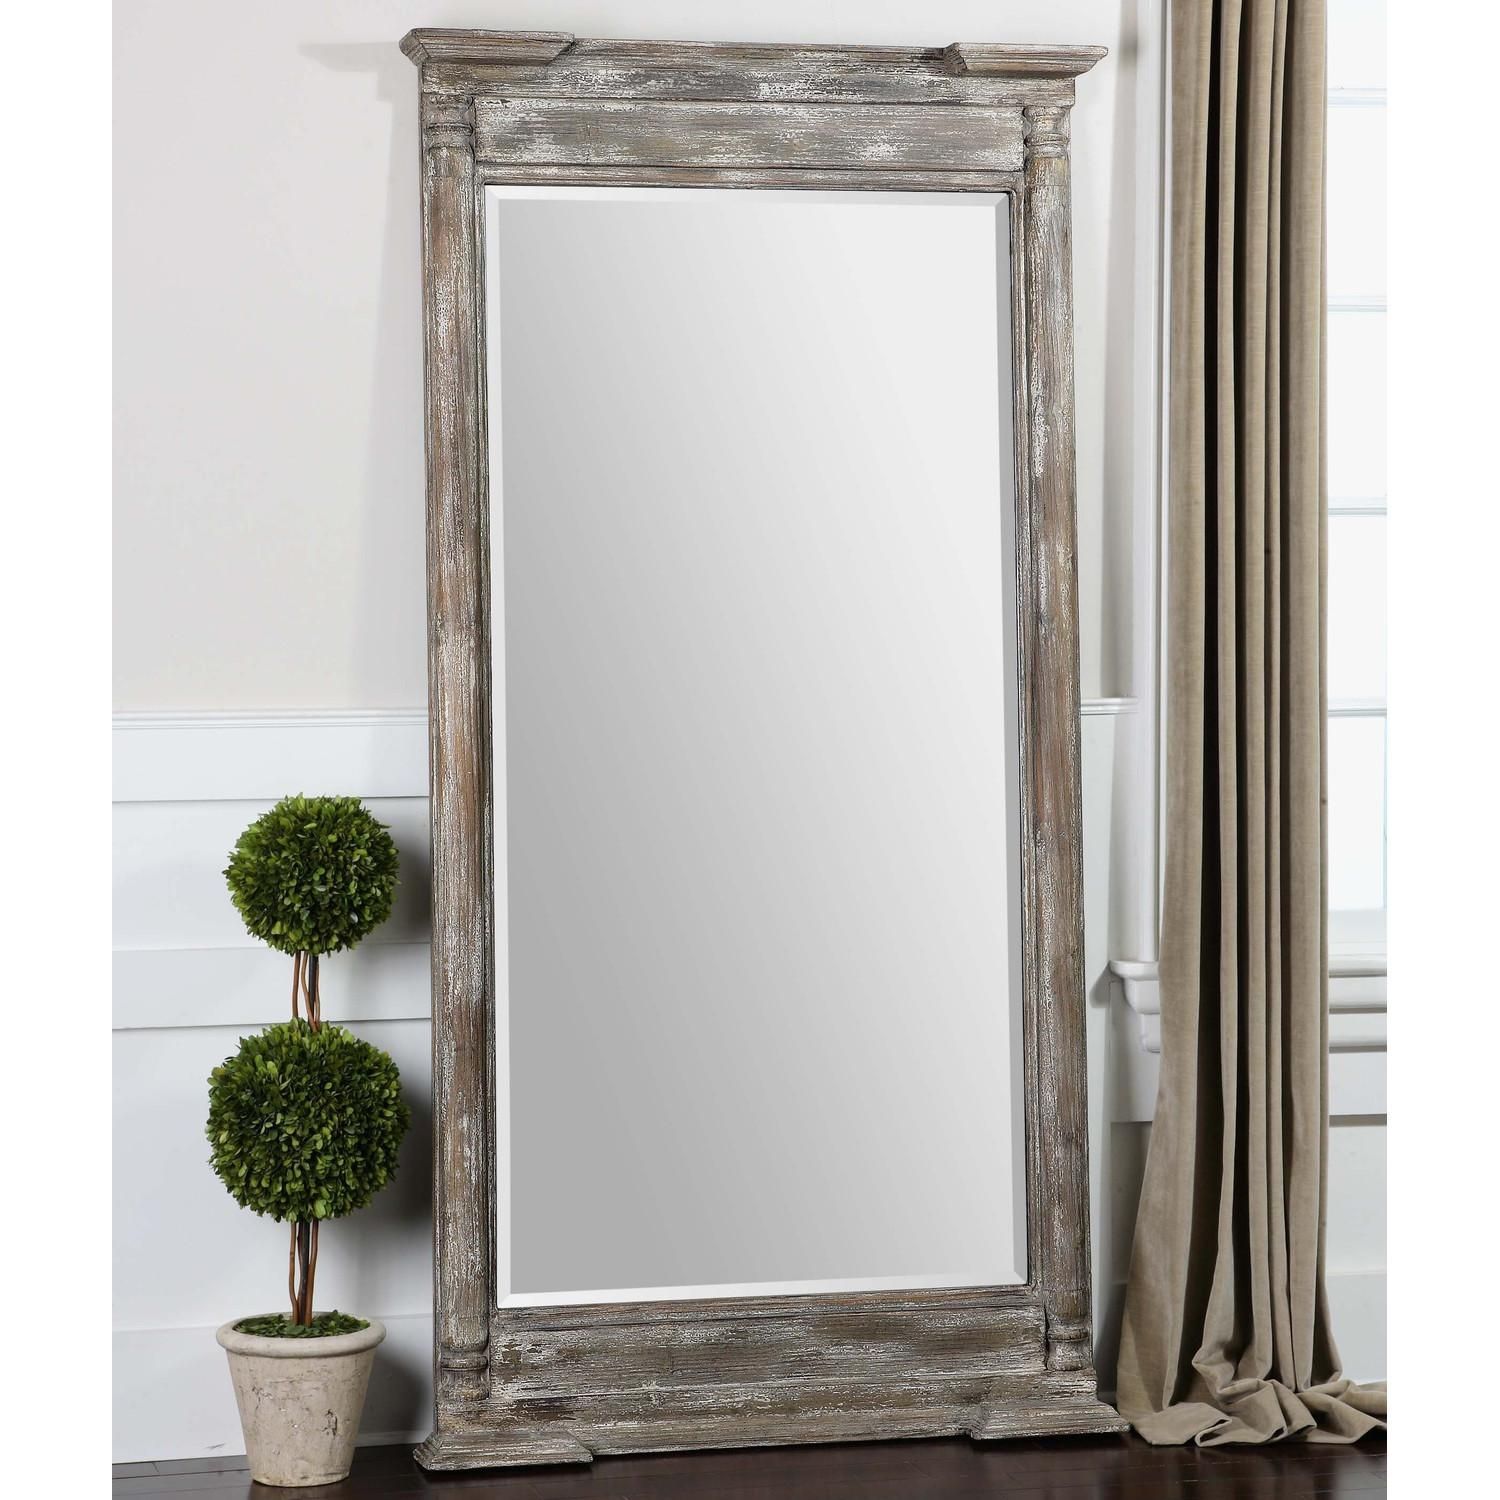 Cheap Extra Large Floor Mirrors | Floor Decoration In Oversized Antique Mirror (View 16 of 20)